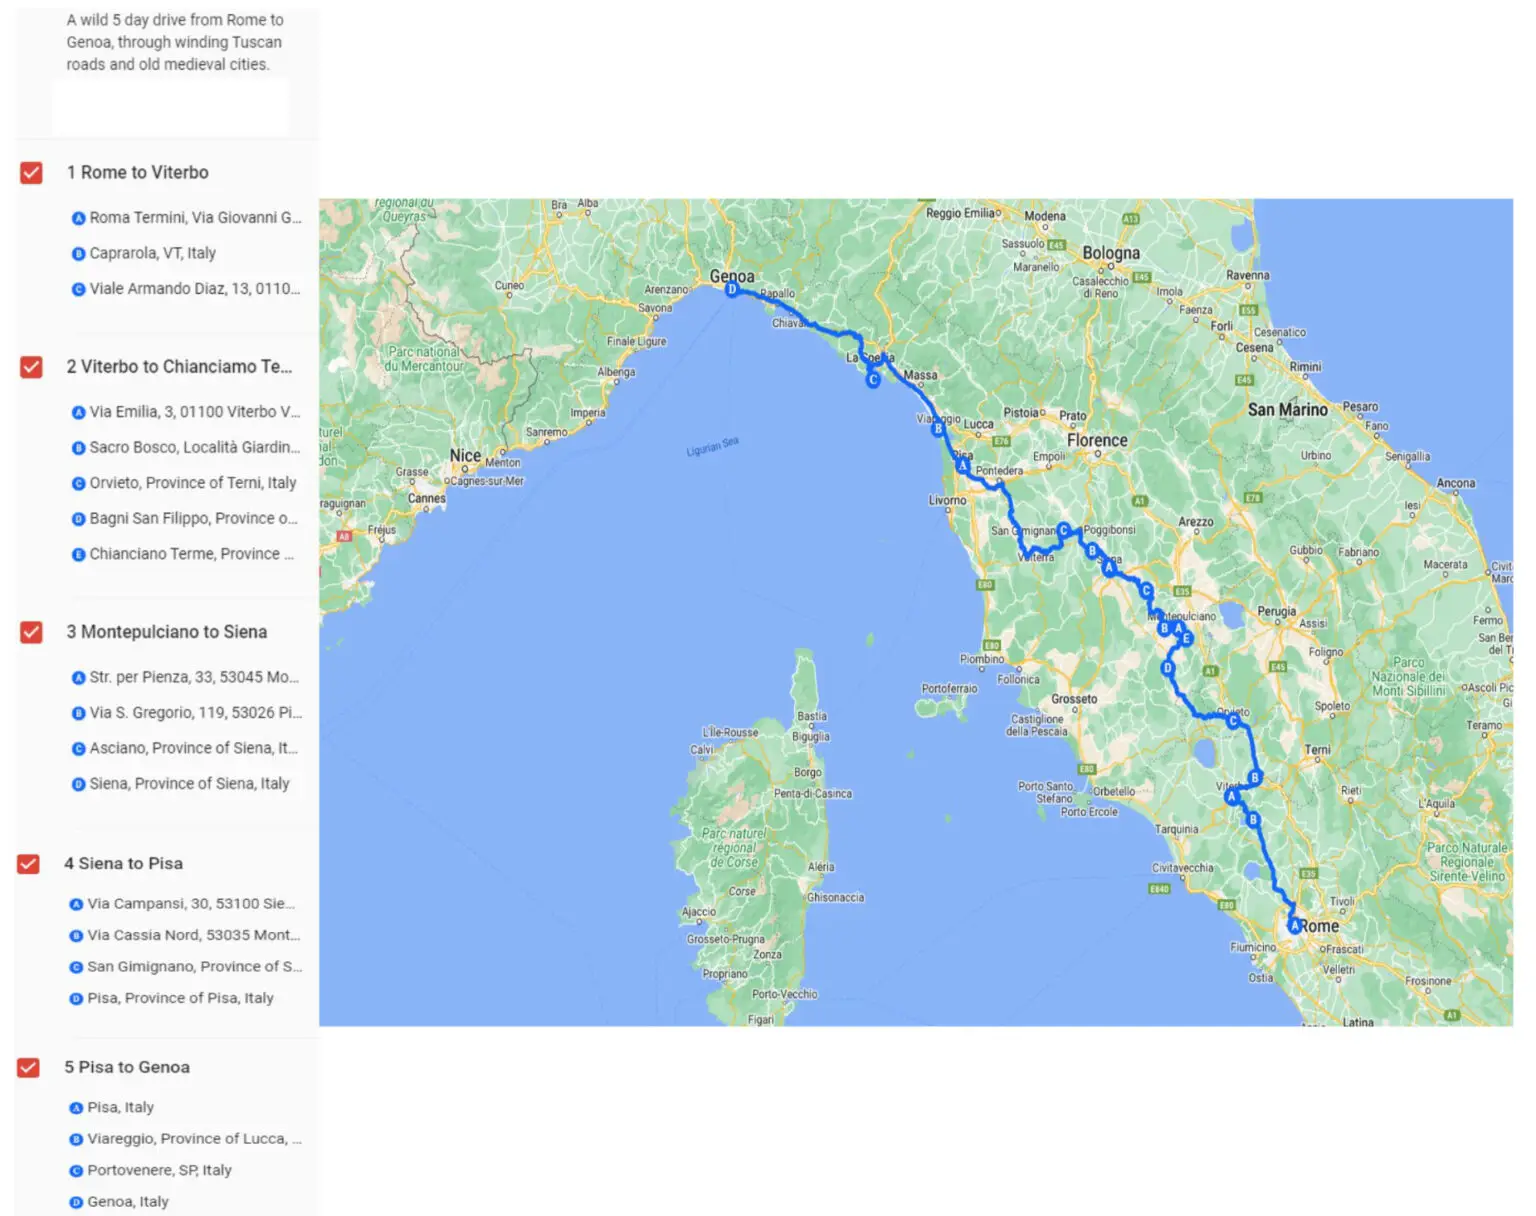 A wild five days drive from Rome to Genoa